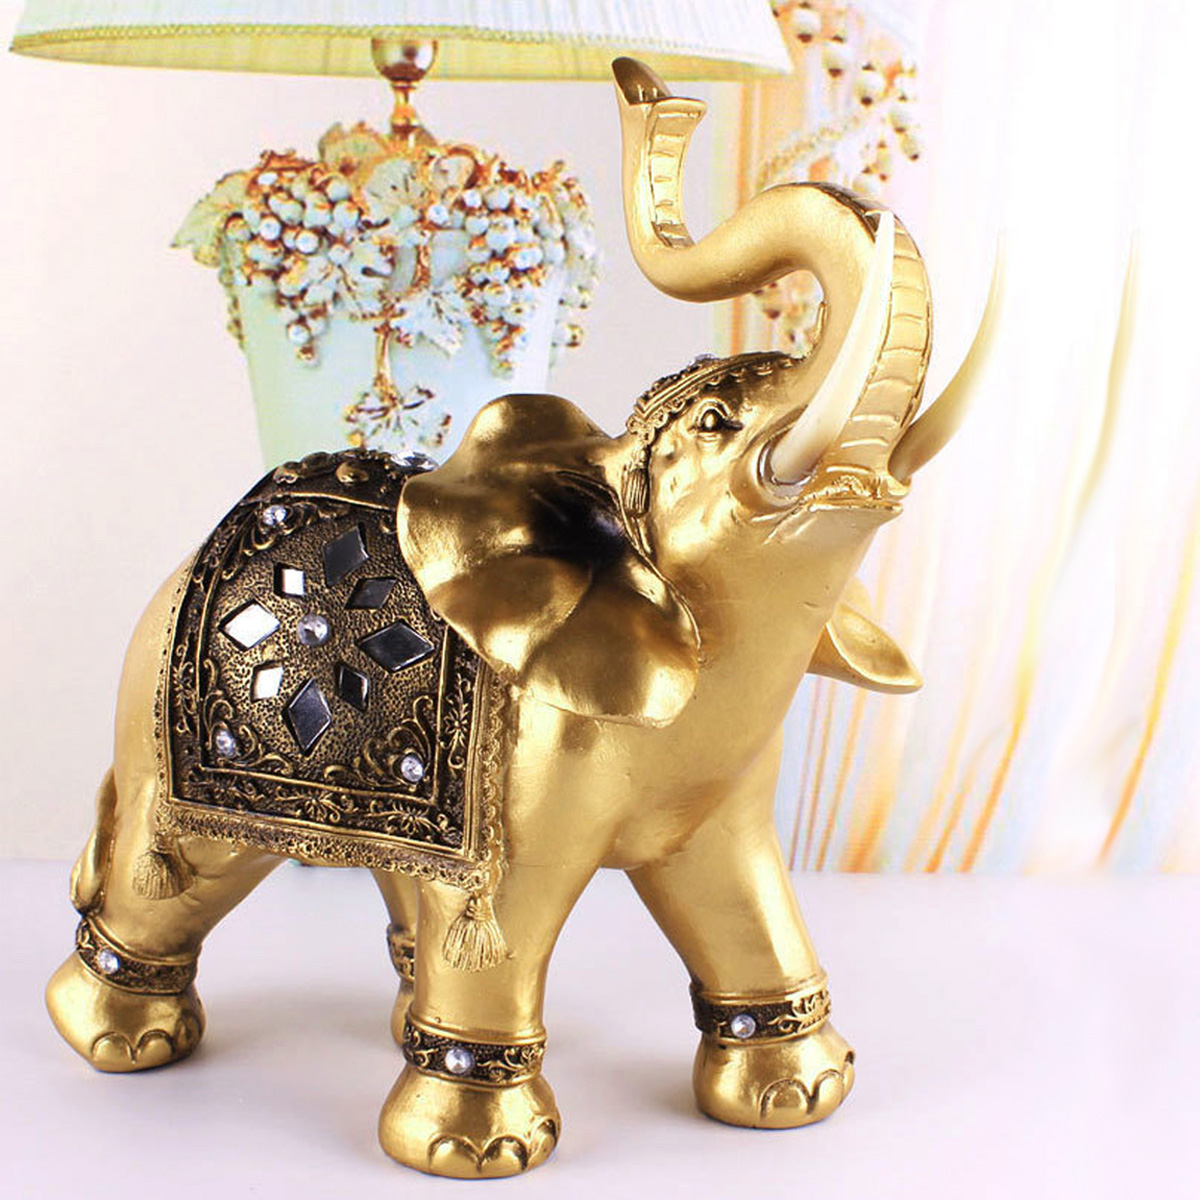 Lucky-Charm-Fengshui-Mascot-Golden-Elephant-Resin-Mini-Statue-Home-Desk-Ornaments-Gifts-Home-Decorat-1634232-2